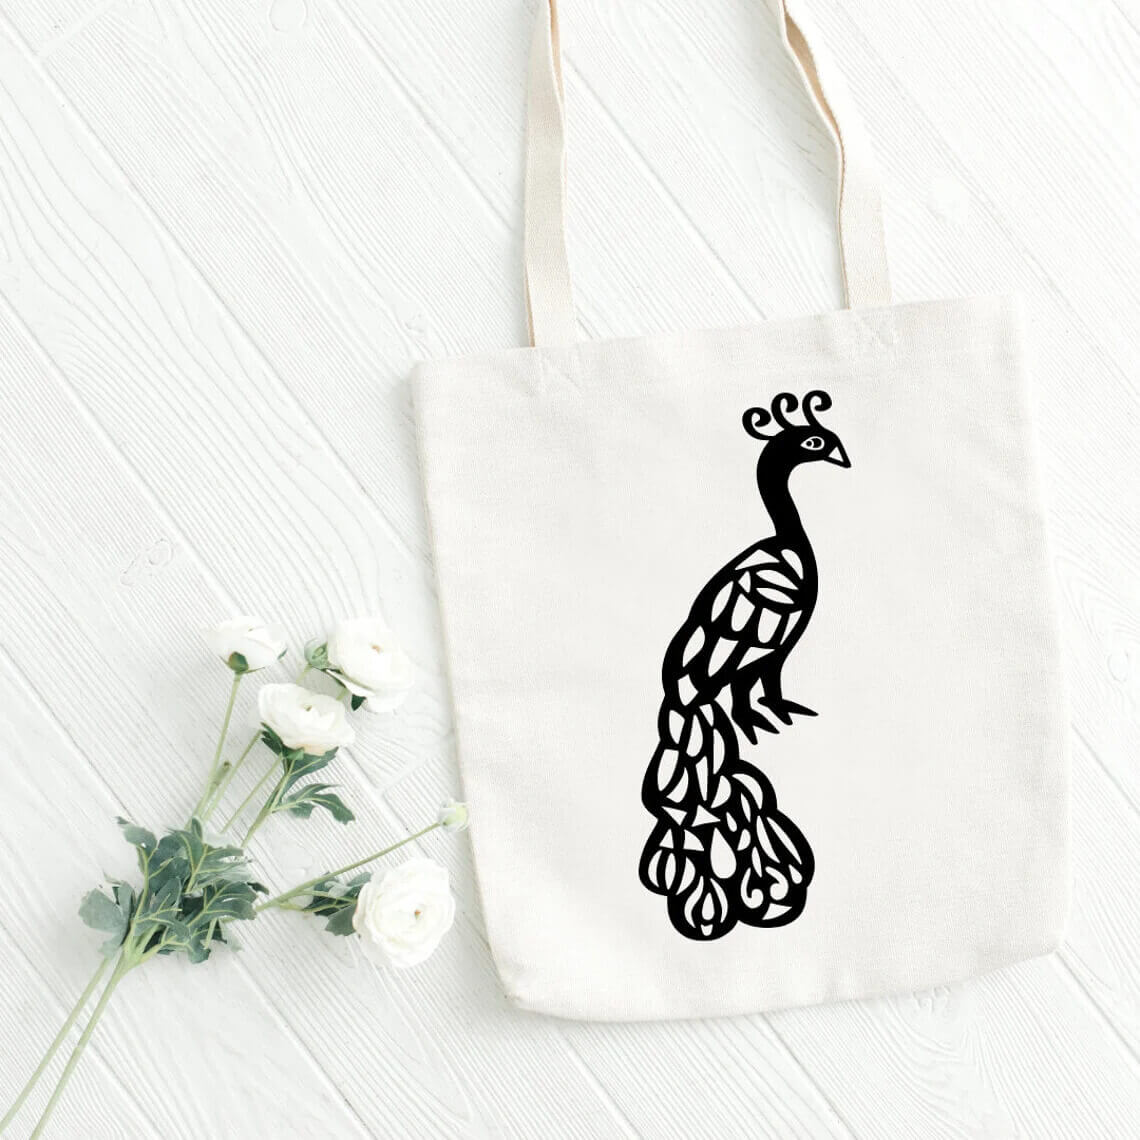 Tote bag with a black and white peacock on it.